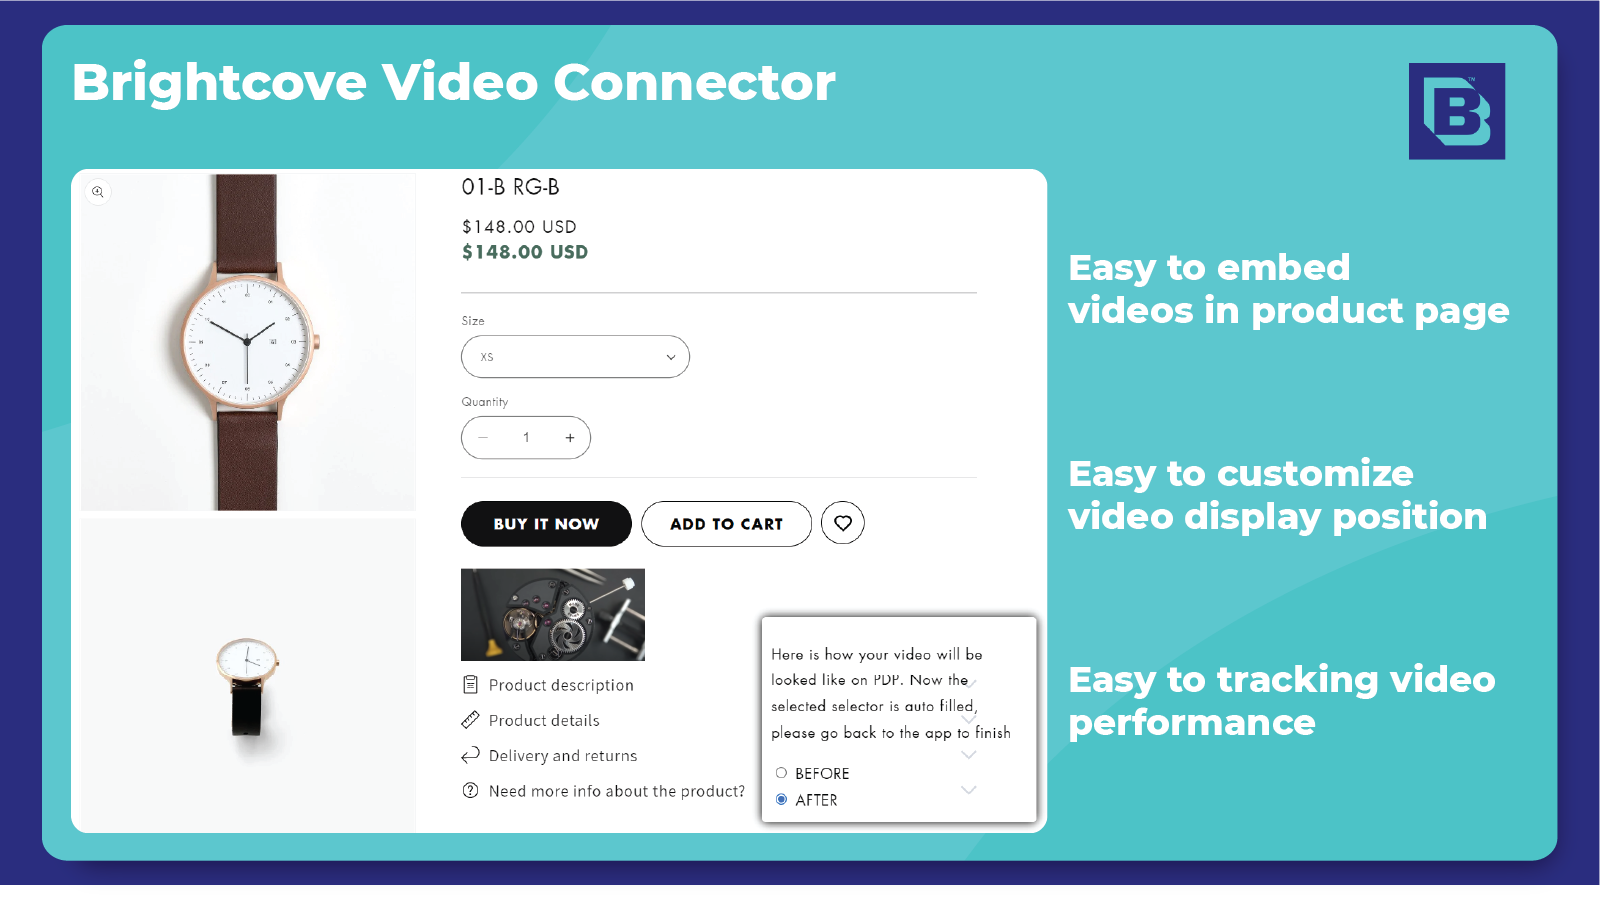 Easy to embed videos and tracking video performance